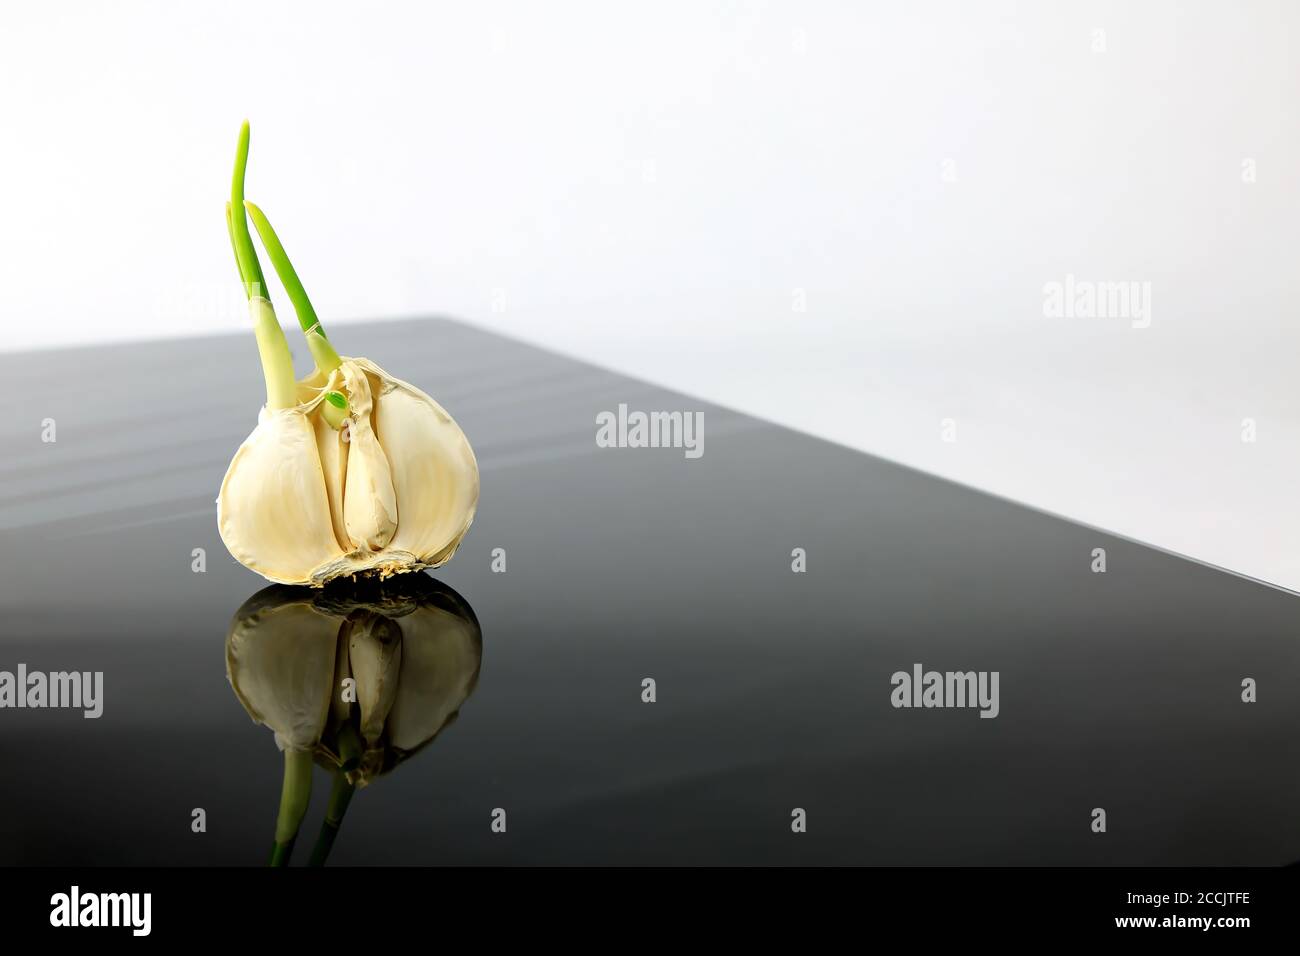 Garlic on a black plate wanders across the picture Stock Photo